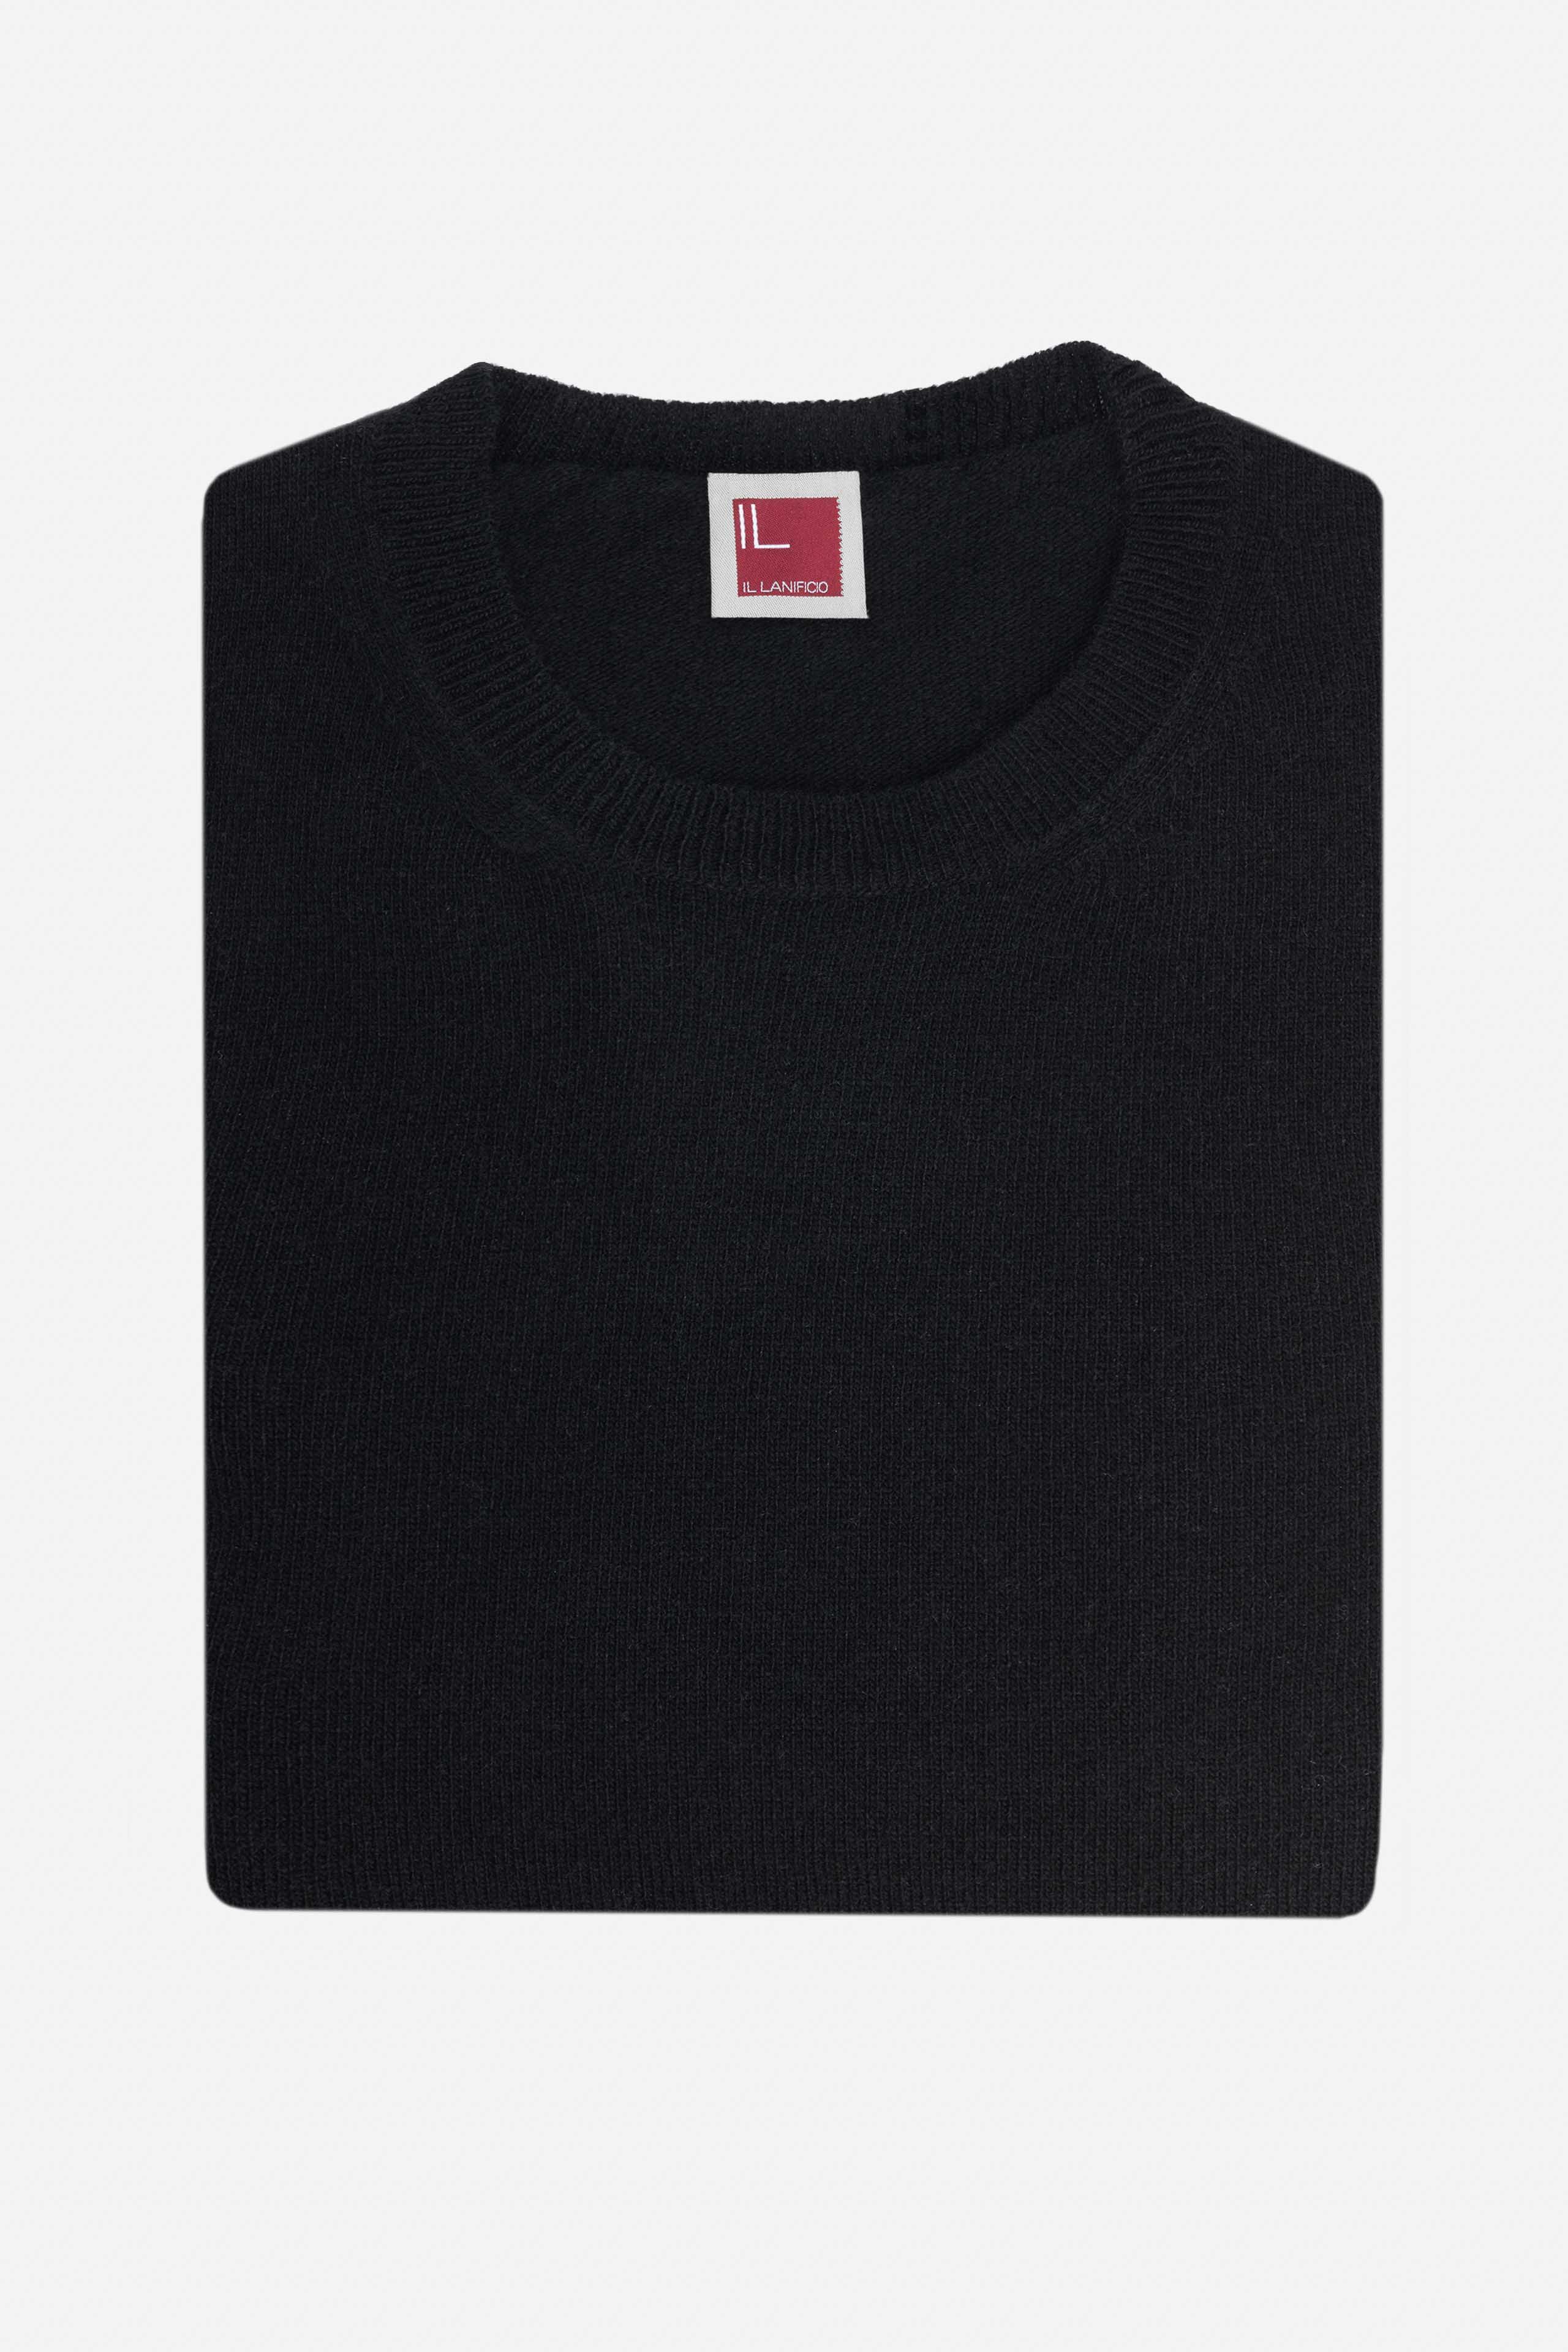 Wool and cashmere crewneck - BLACK